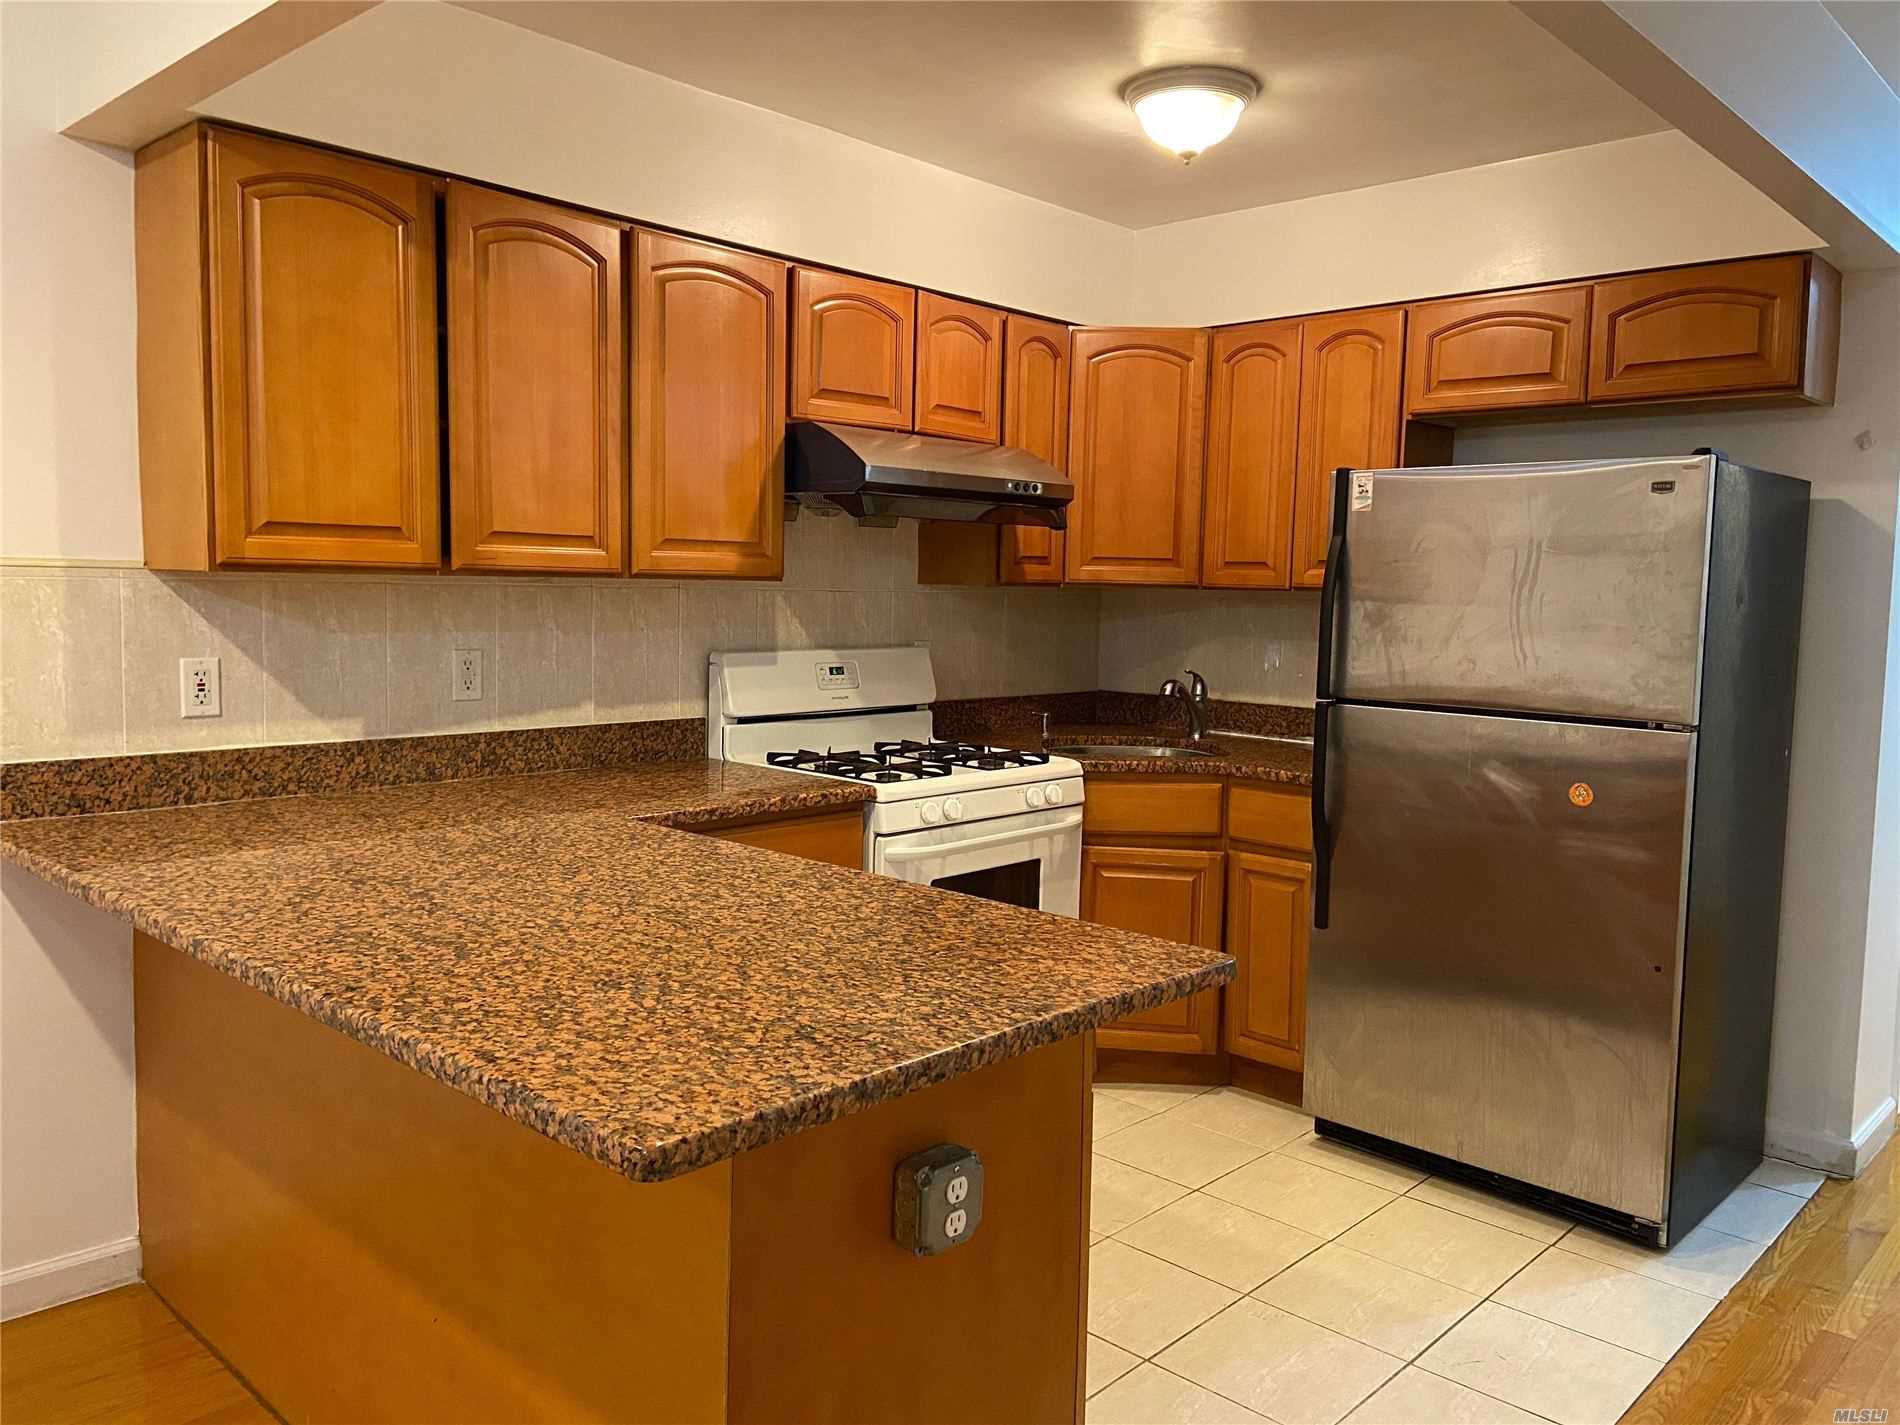 Spacious Apartment Features Large Eik With Granite Counter Tops And Island, 3 Bedrooms, 2 Full Bath, 2 Walk In Closets In Master Bedroom, 2 Balconies, Separate Entrance, And Hardwood Floor Throughout. Must See!